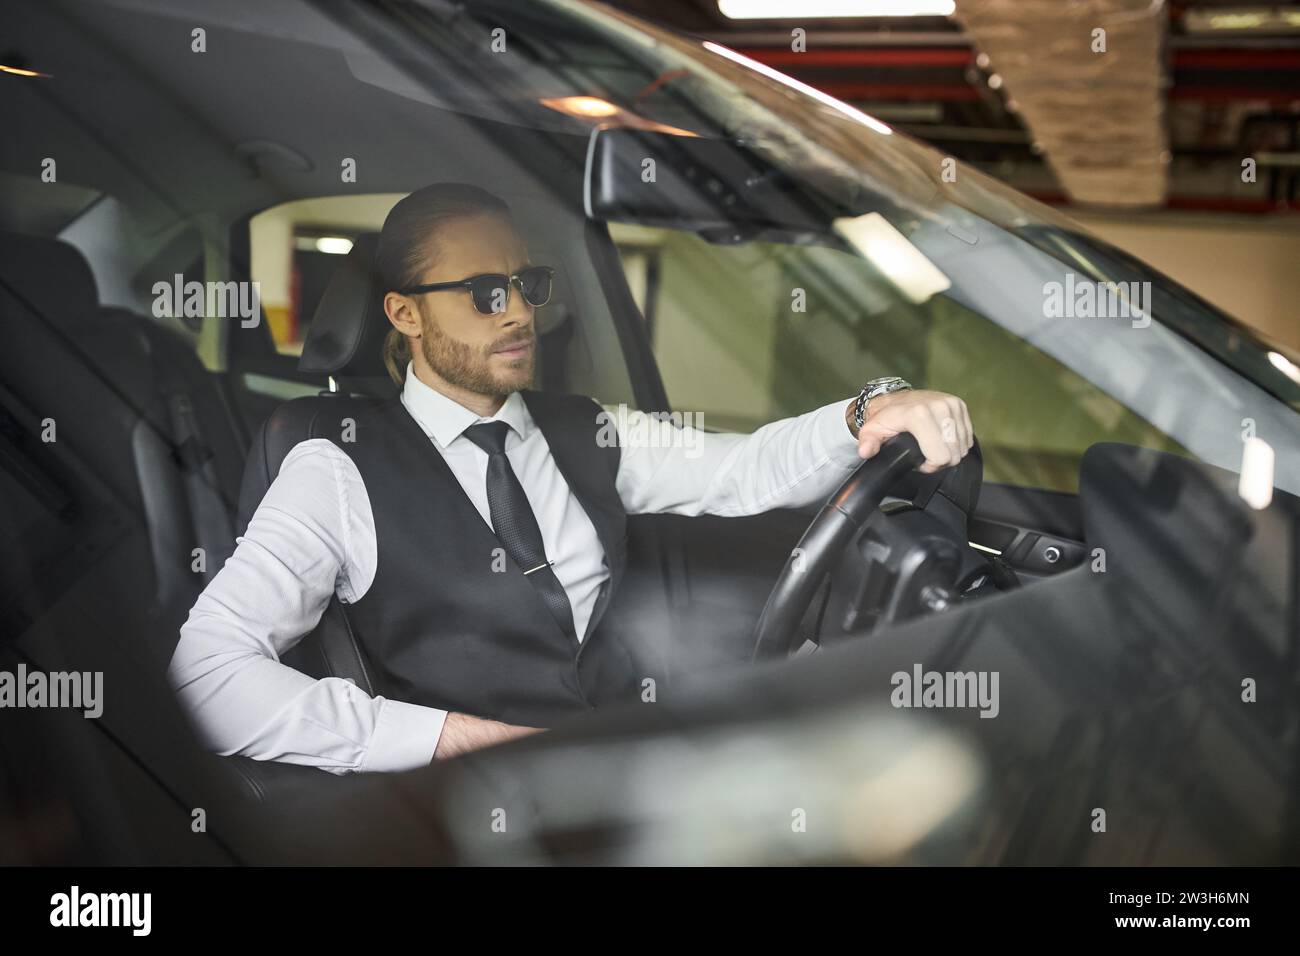 handsome bearded businessman with exquisite dapper style with sunglasses behind steering wheel Stock Photo